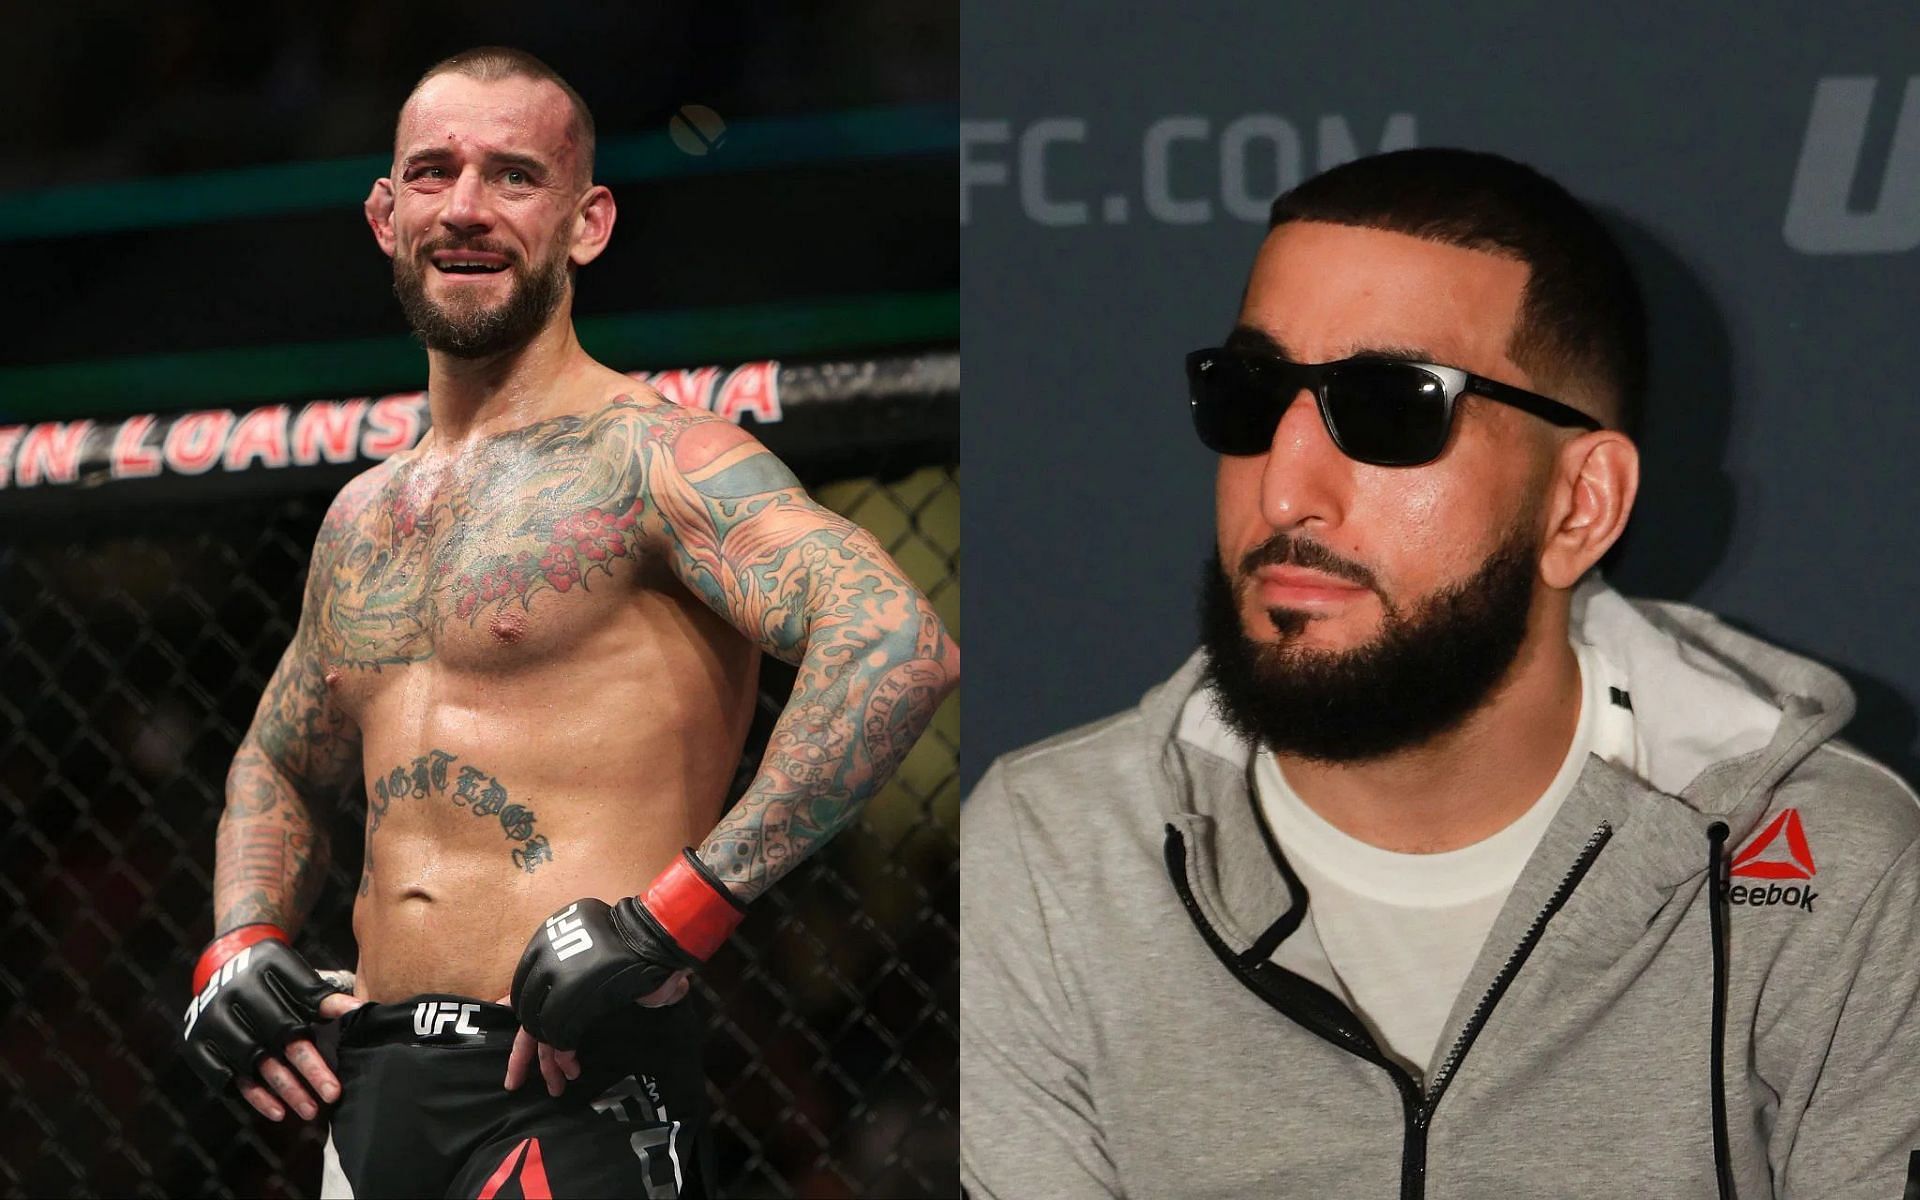 CM Punk (left) and Belal Muhammad (right) [Images courtesy of Getty]